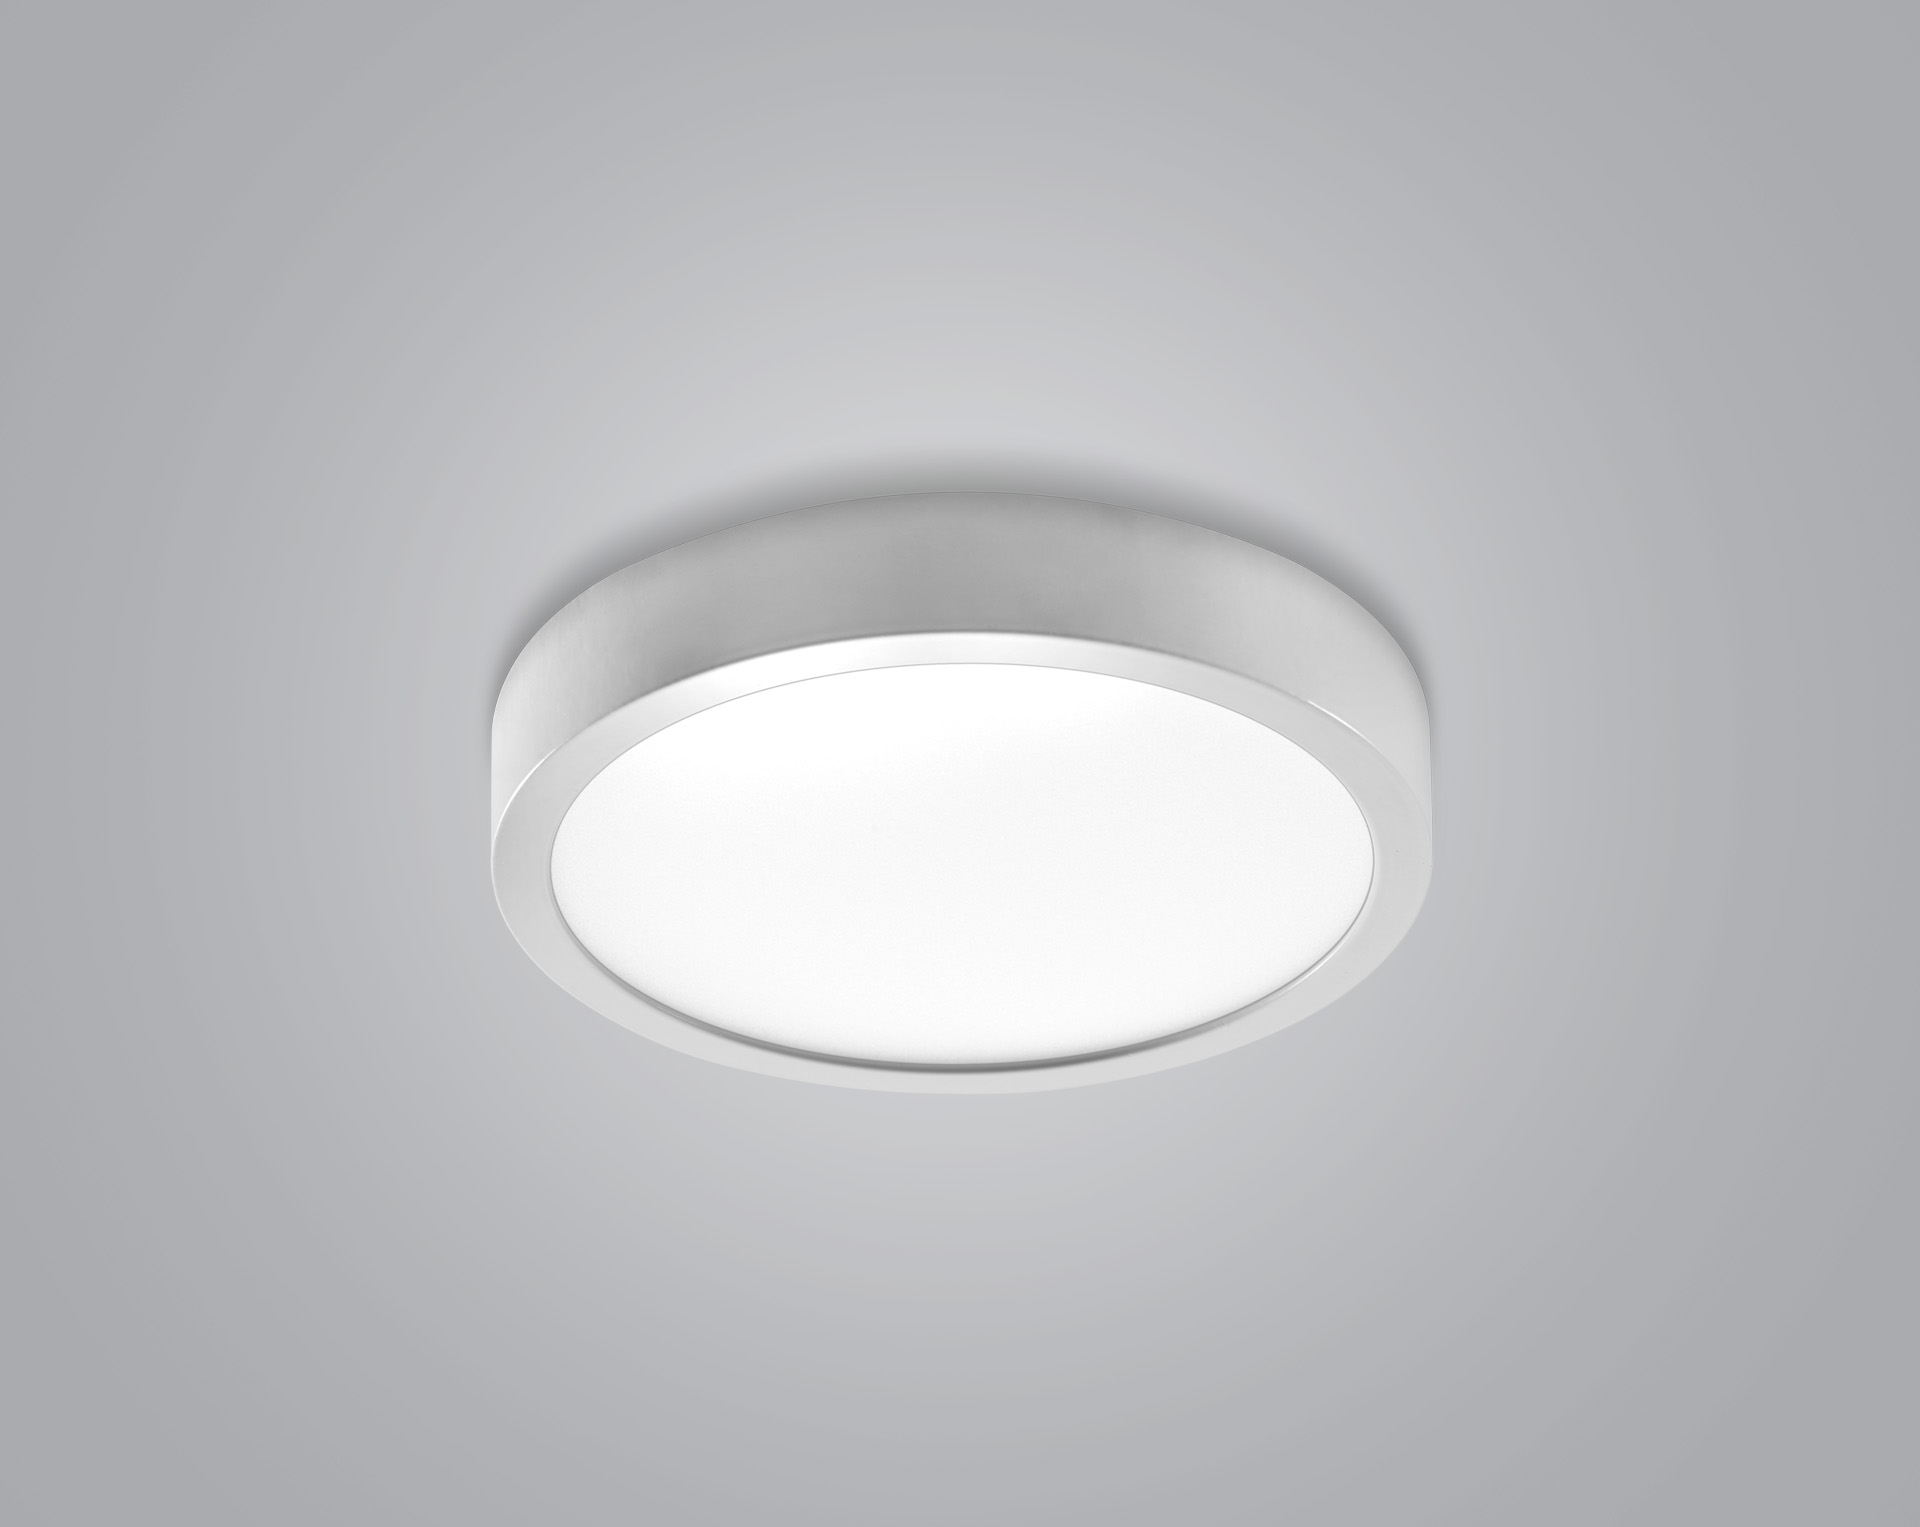 Get The Best Surface Mounted Led Lights